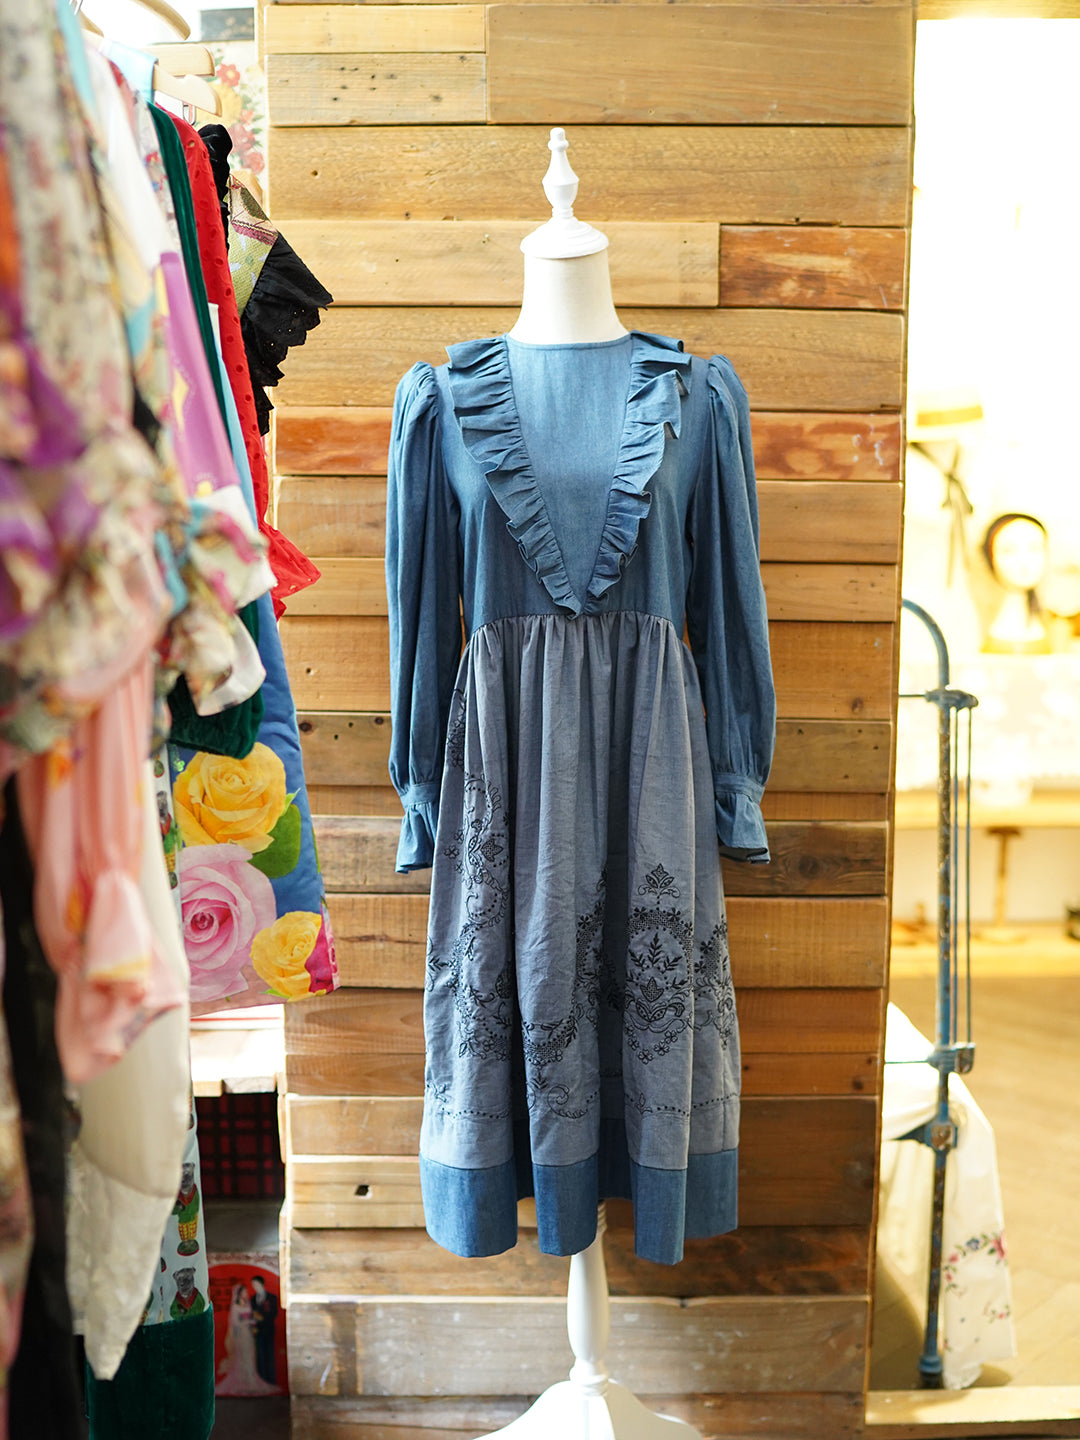 Unlogical Poem One-of-a-kind Victorian Style Embroidered Denim Dress